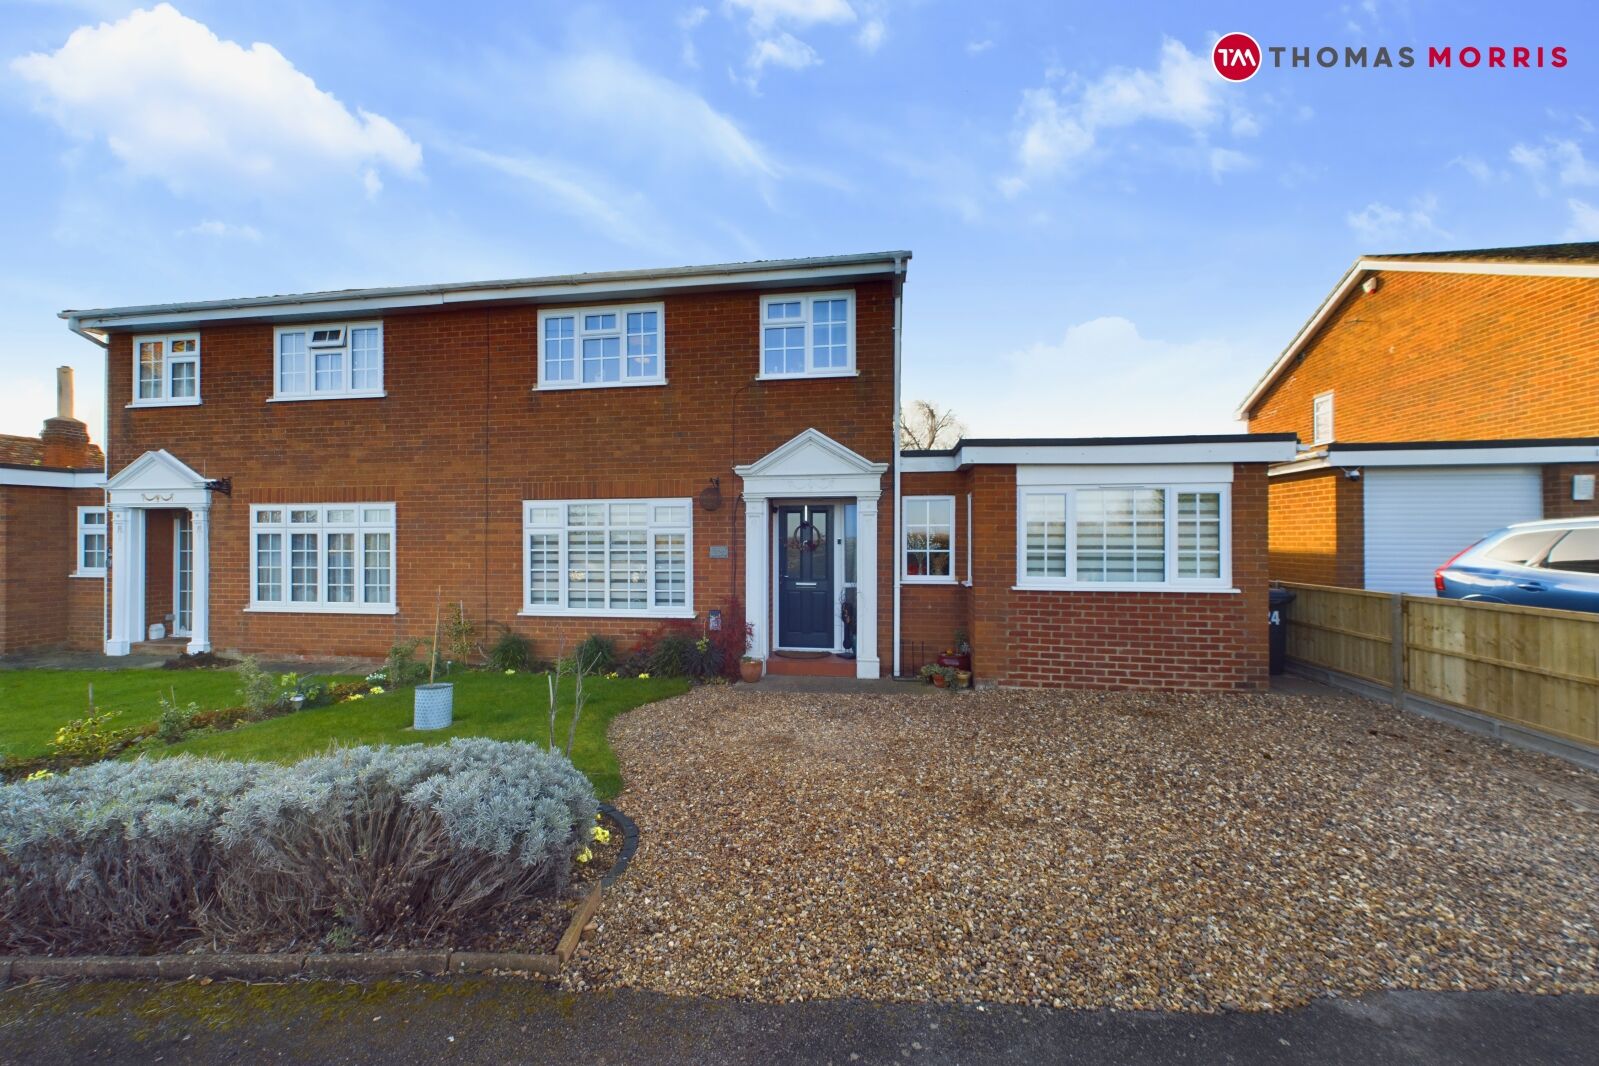 3 bedroom semi detached house for sale Station Road, Tempsford, SG19, main image